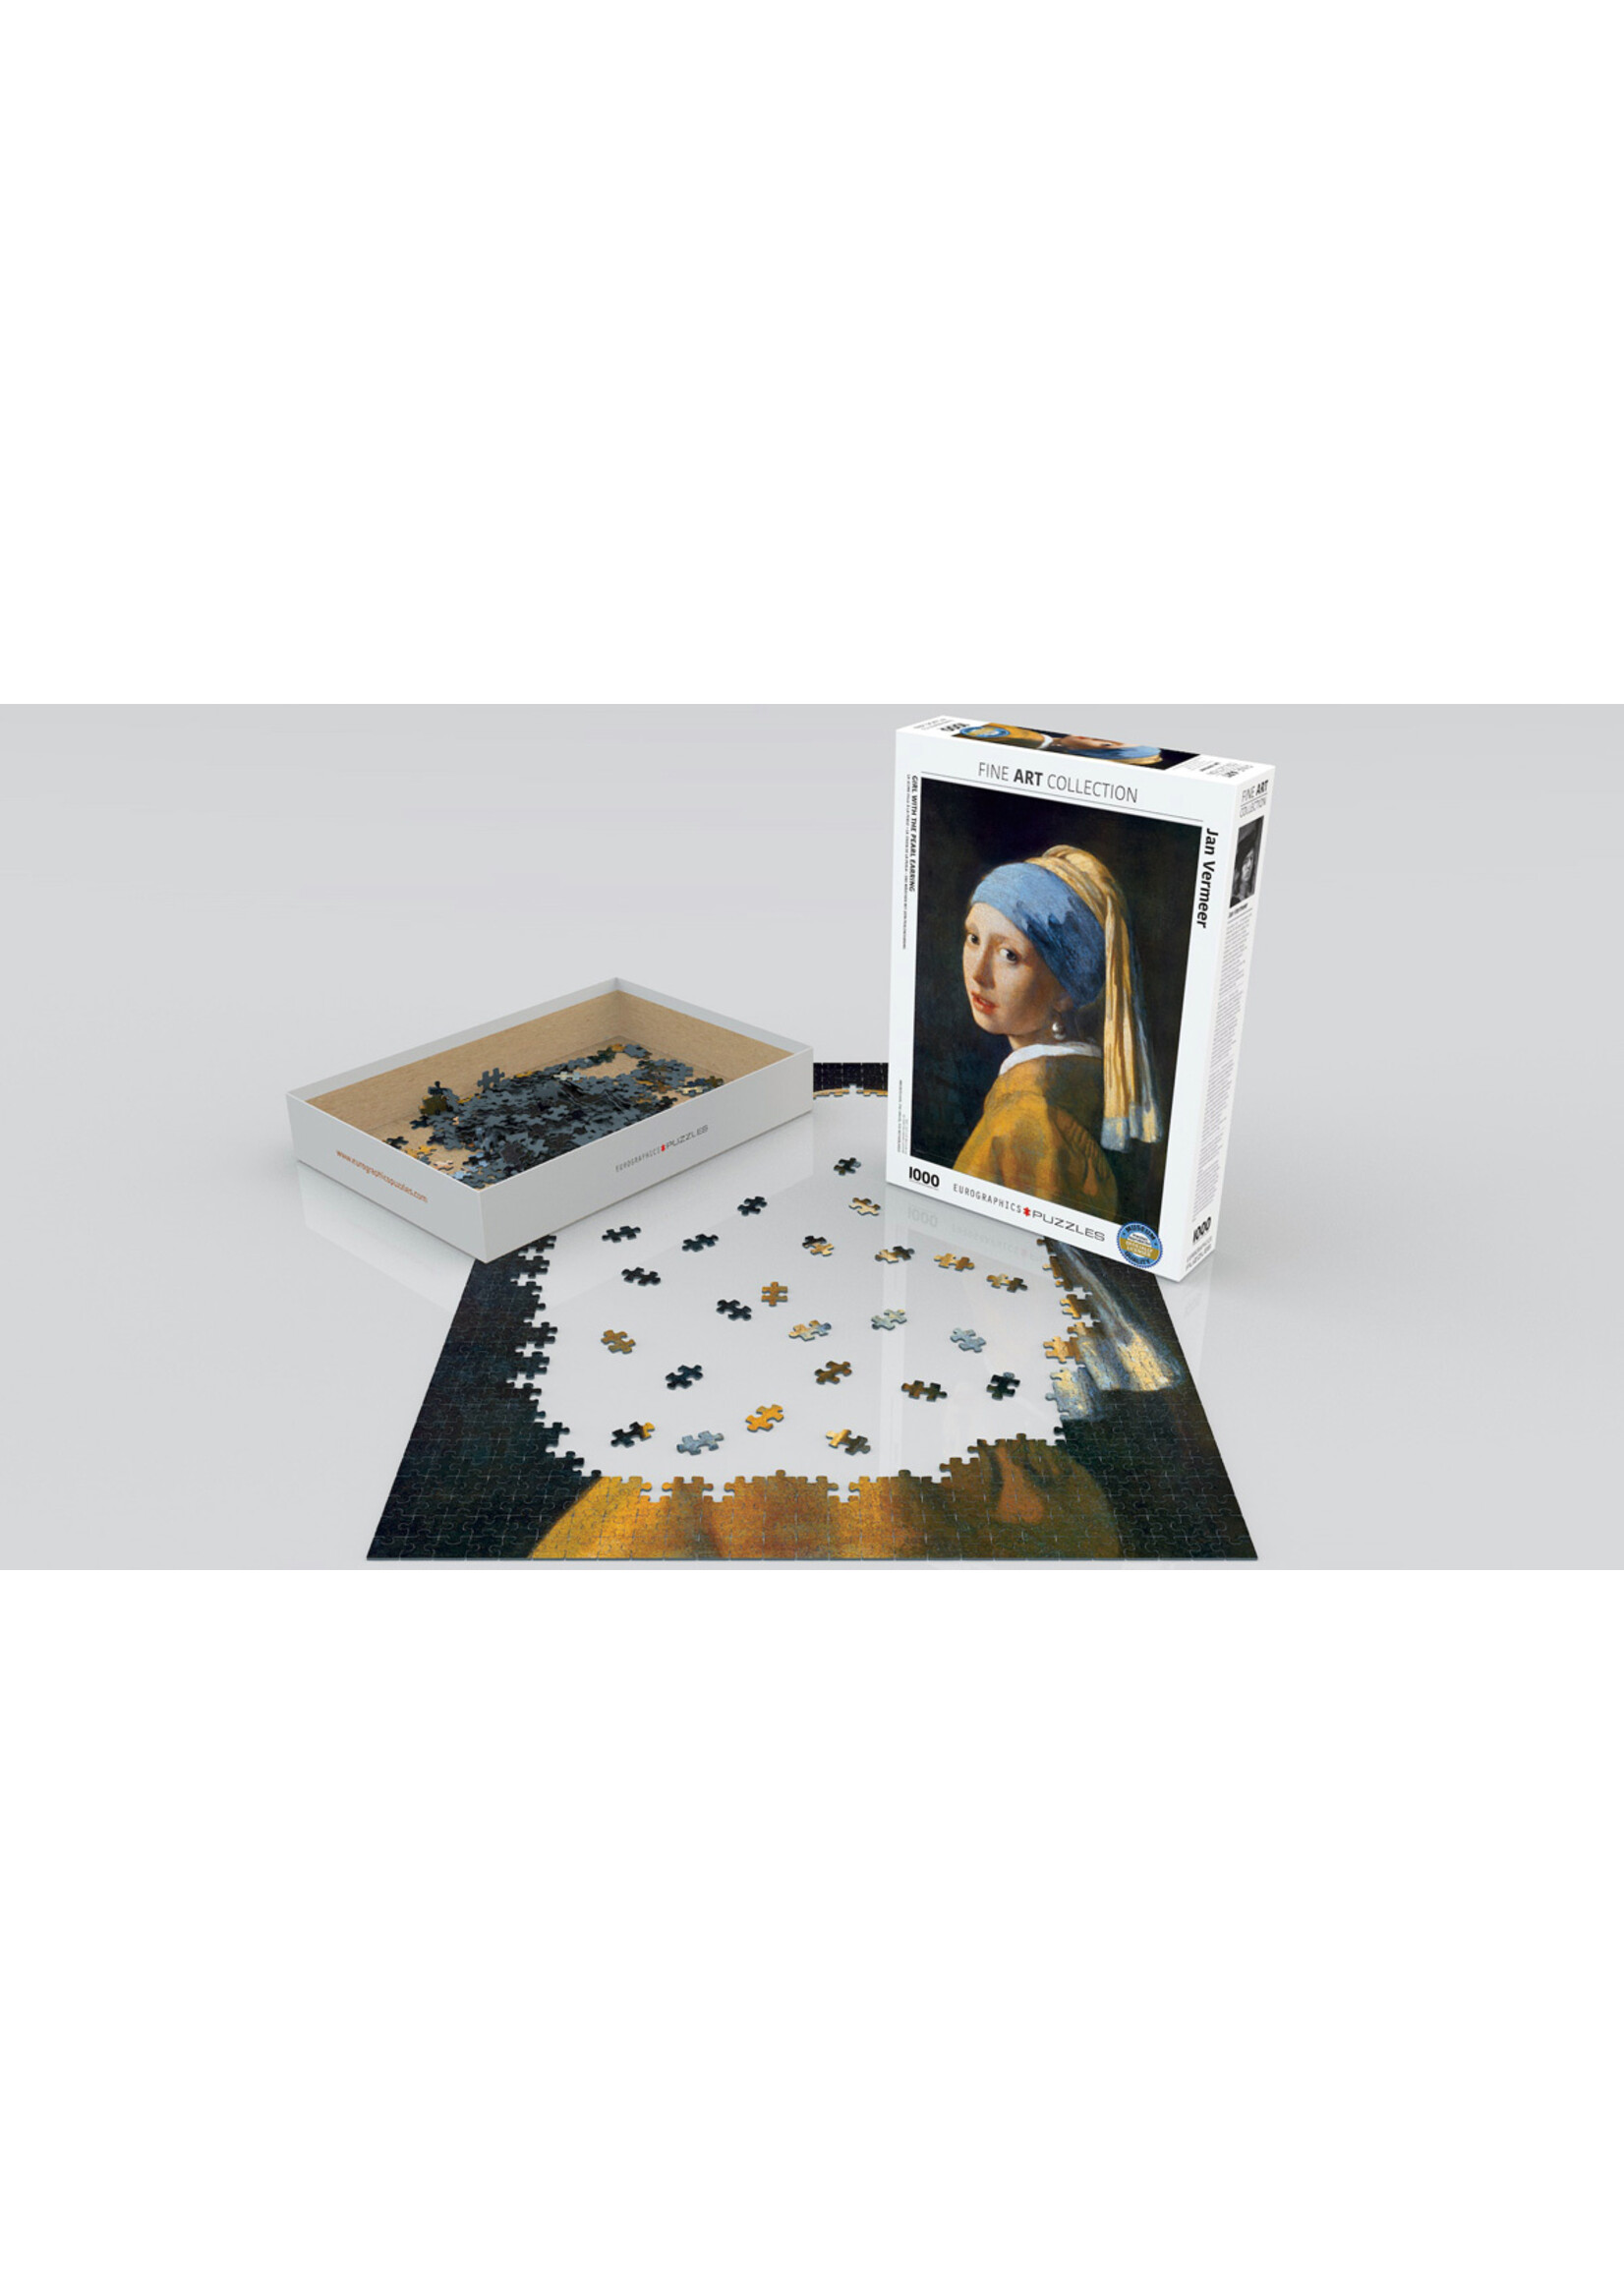 Eurographics "Girl with the Pearl Earring" 1000 Piece Puzzle